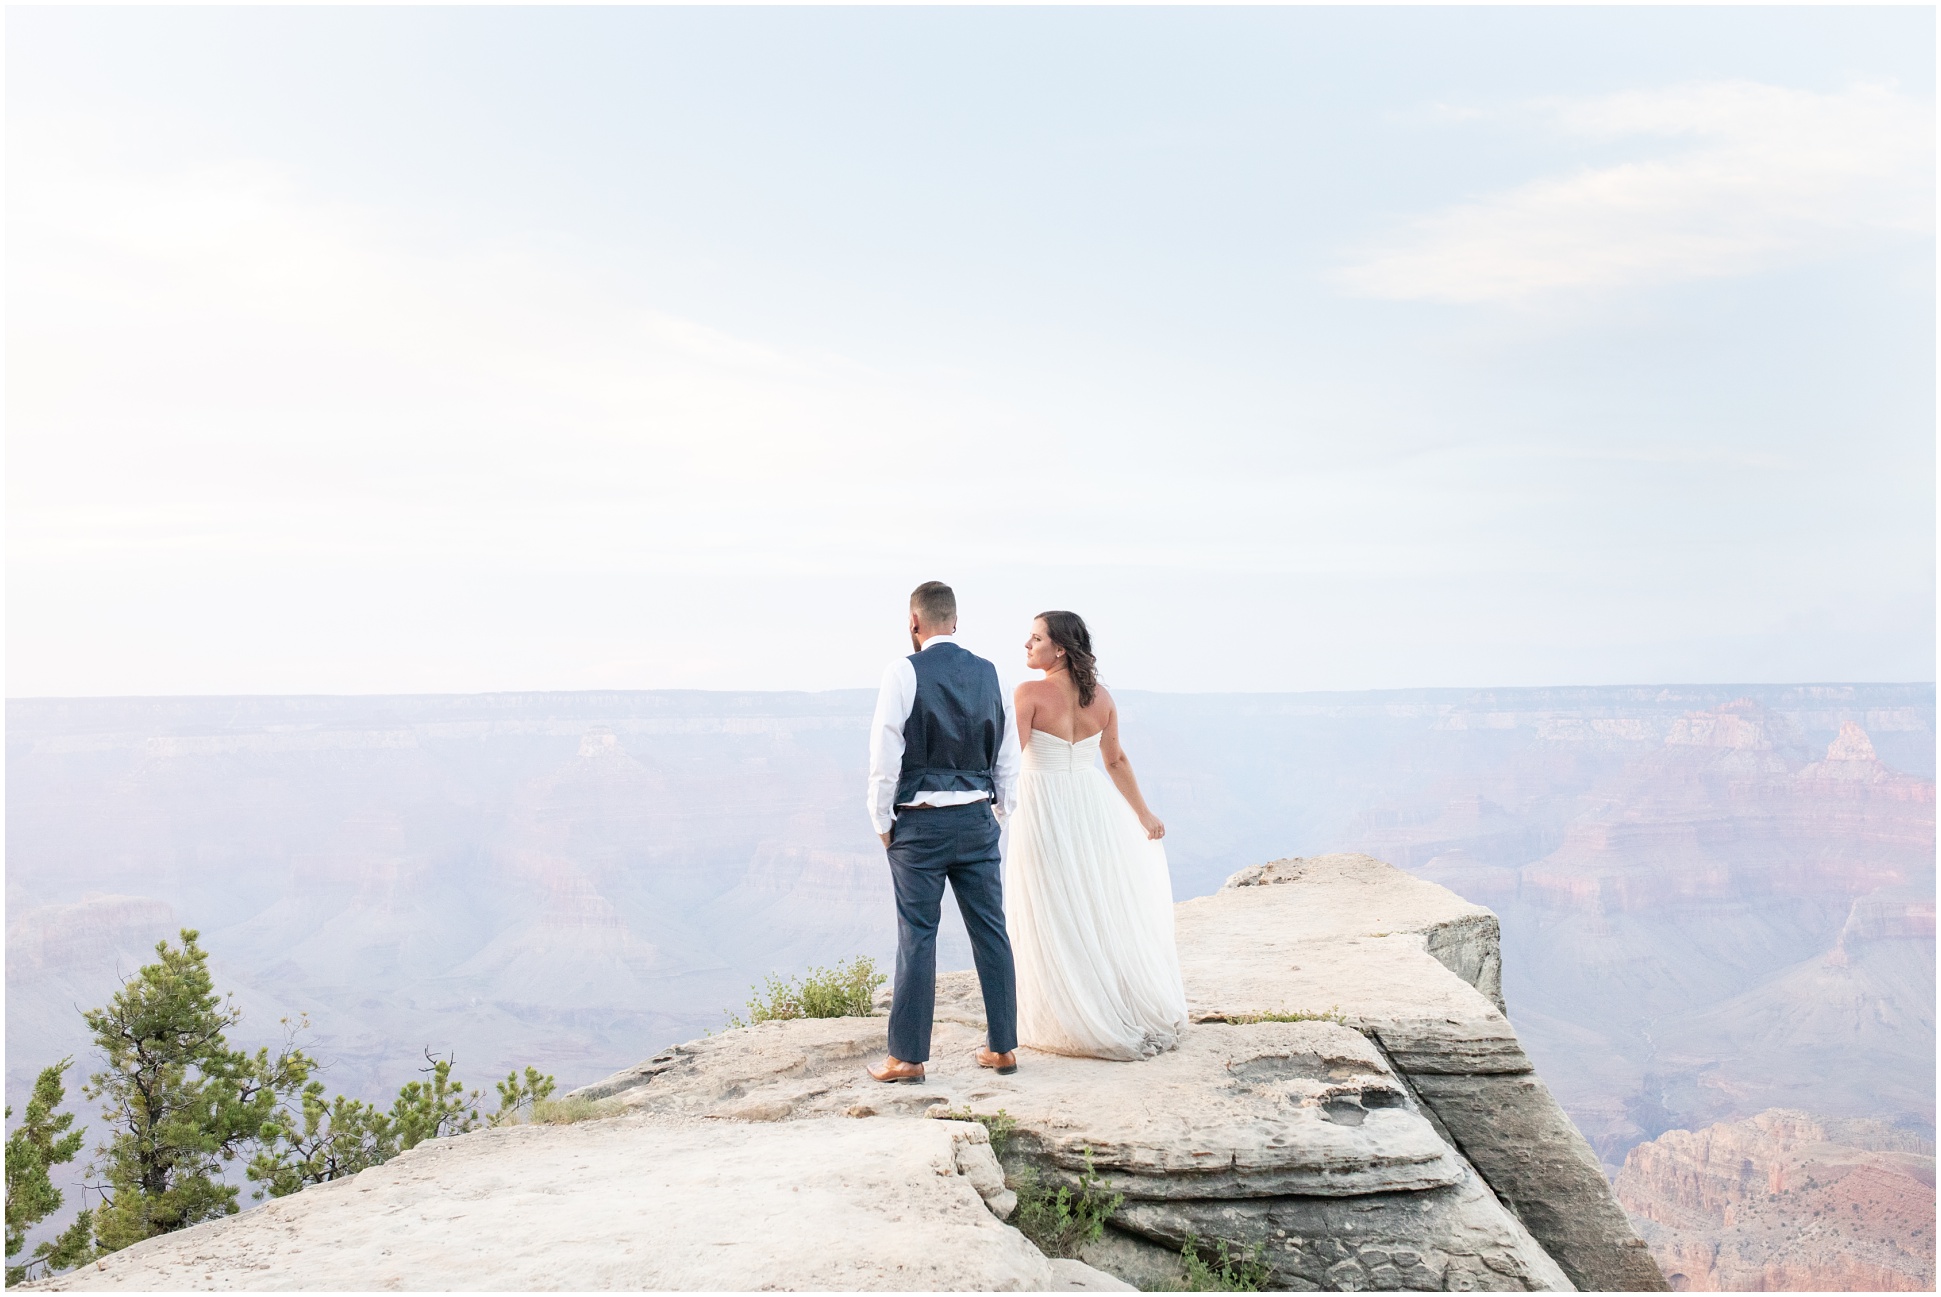 Sunset Wedding Portraits at the Grand Canyon - Bride and Groom standing out on the point of the South Rim 